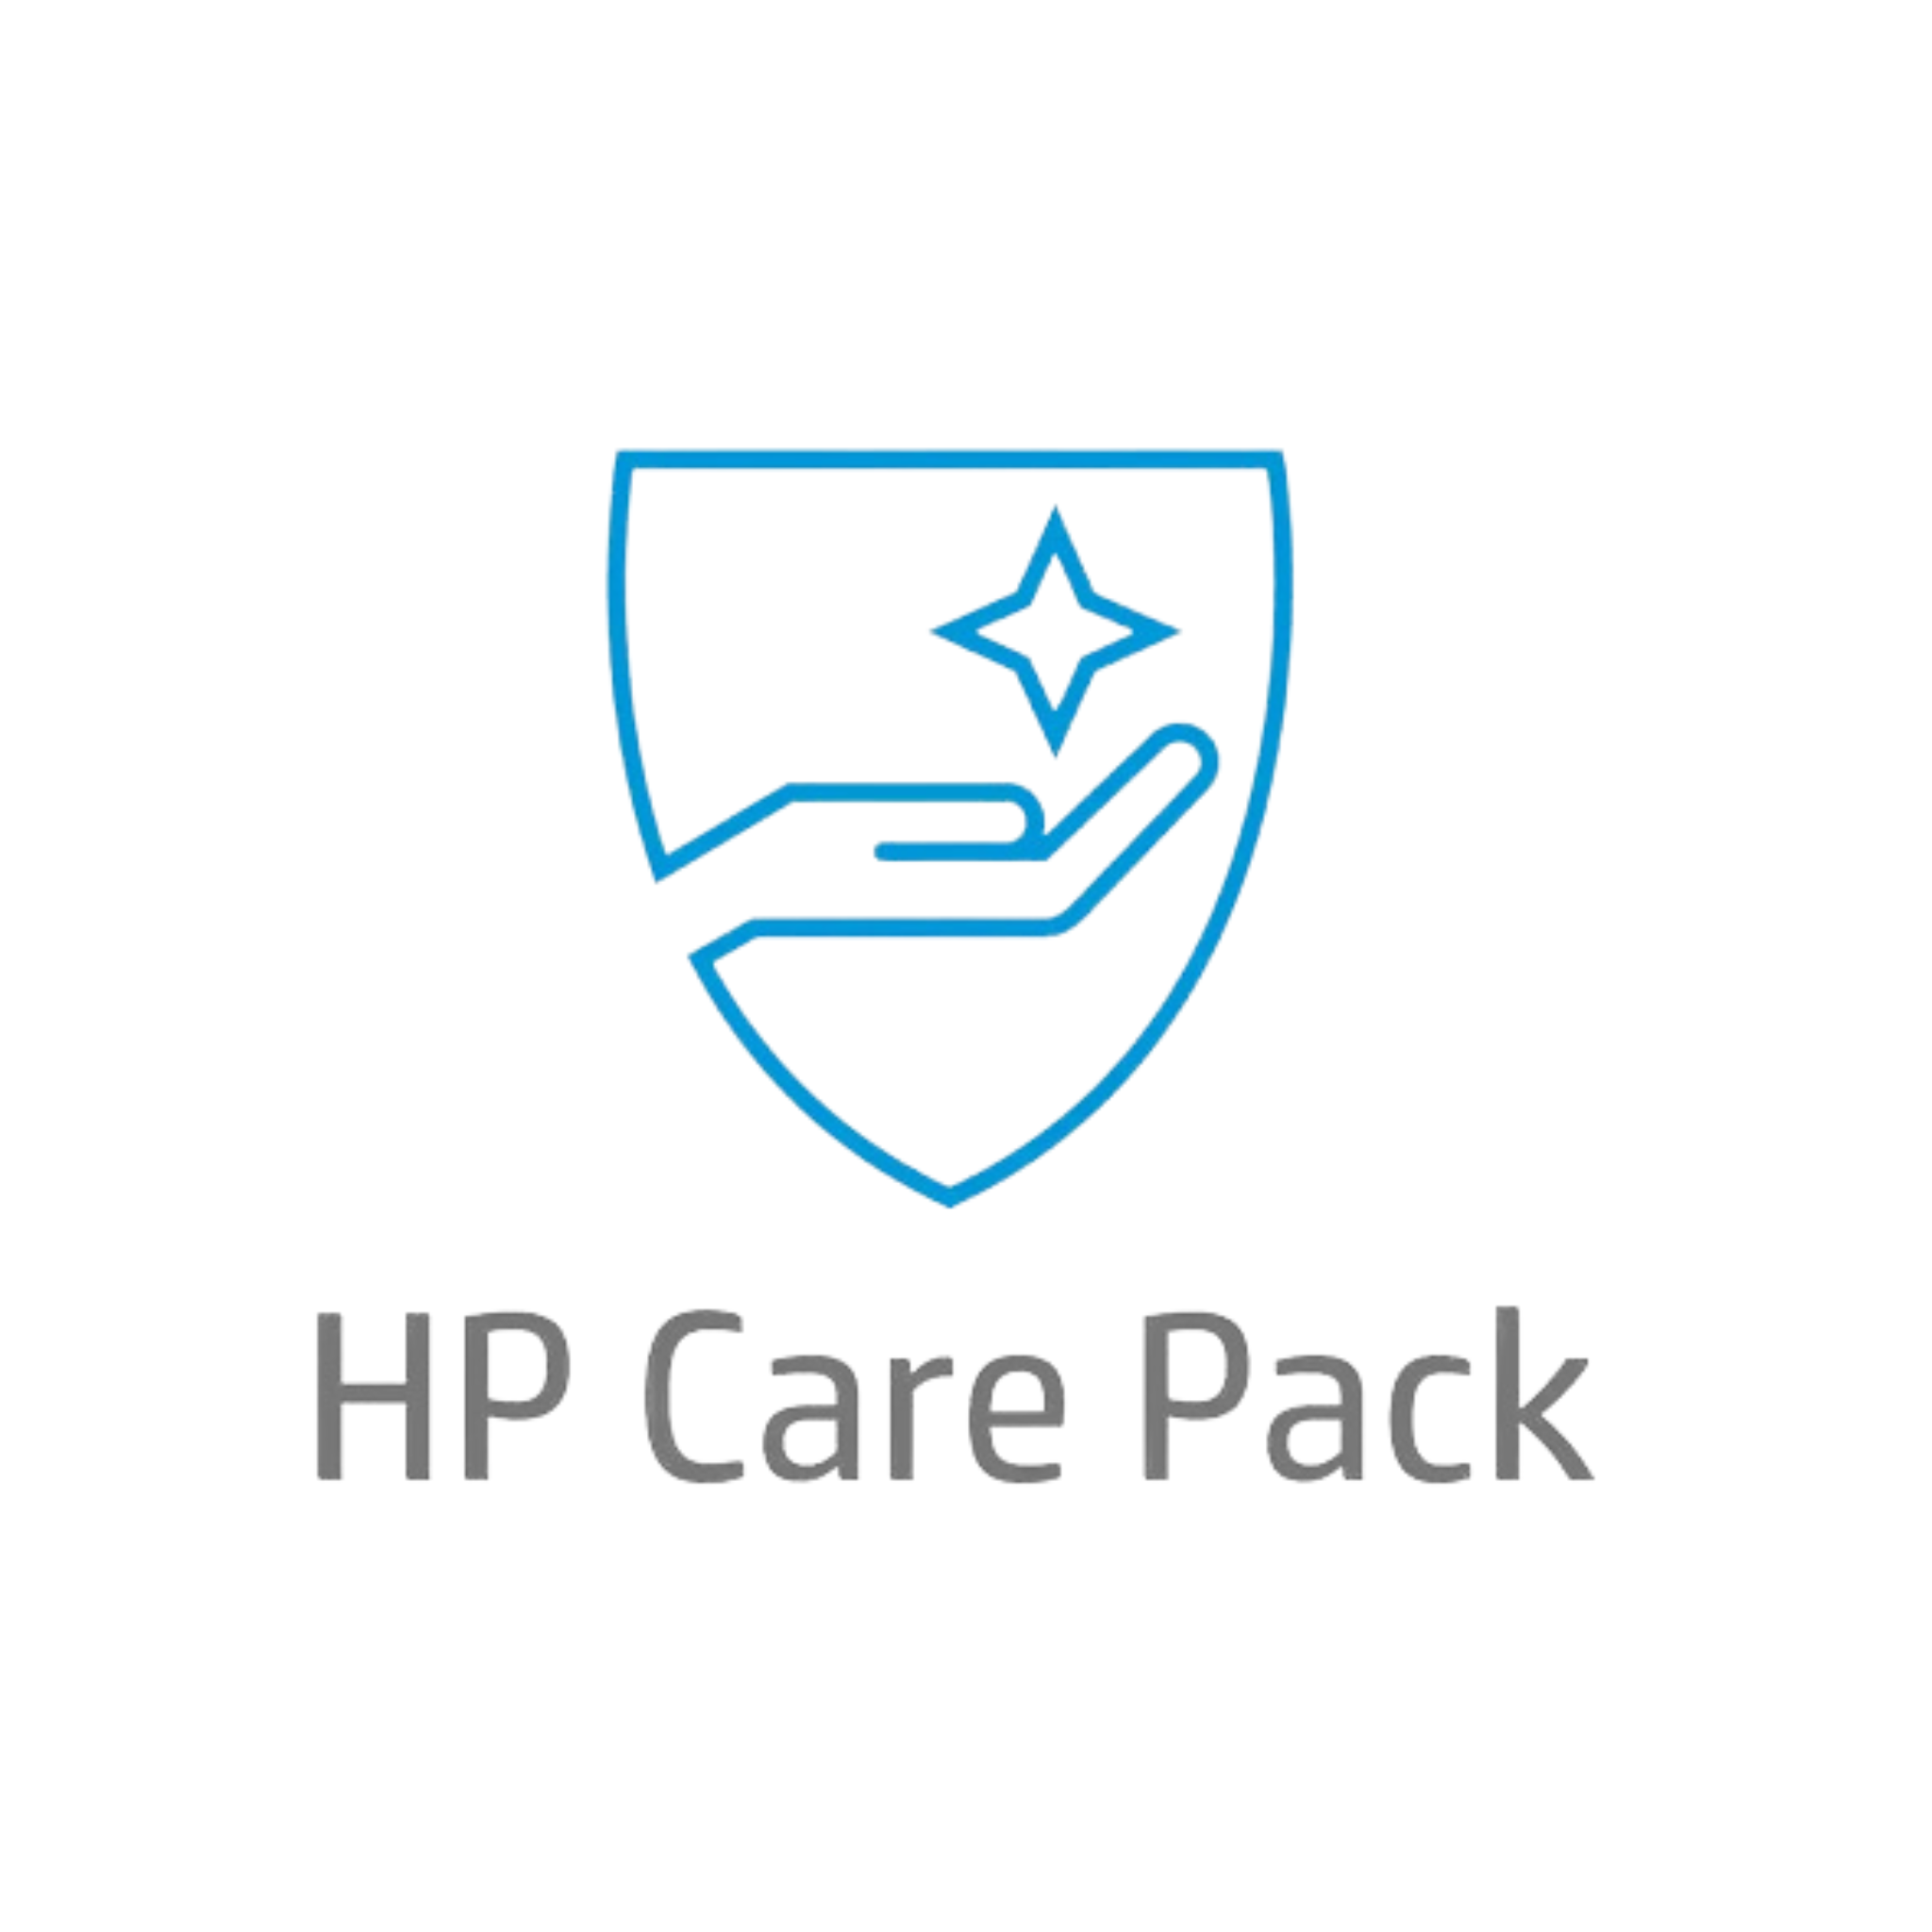 HP UG070E 3 Year Care Pack with Next Day Exchange for OfficeJet Printers for HP OfficeJet 7000 , OfficeJet 7110 , OfficeJet 7612 , OfficeJet Pro 7730 , OfficeJet Pro 7740 Printers